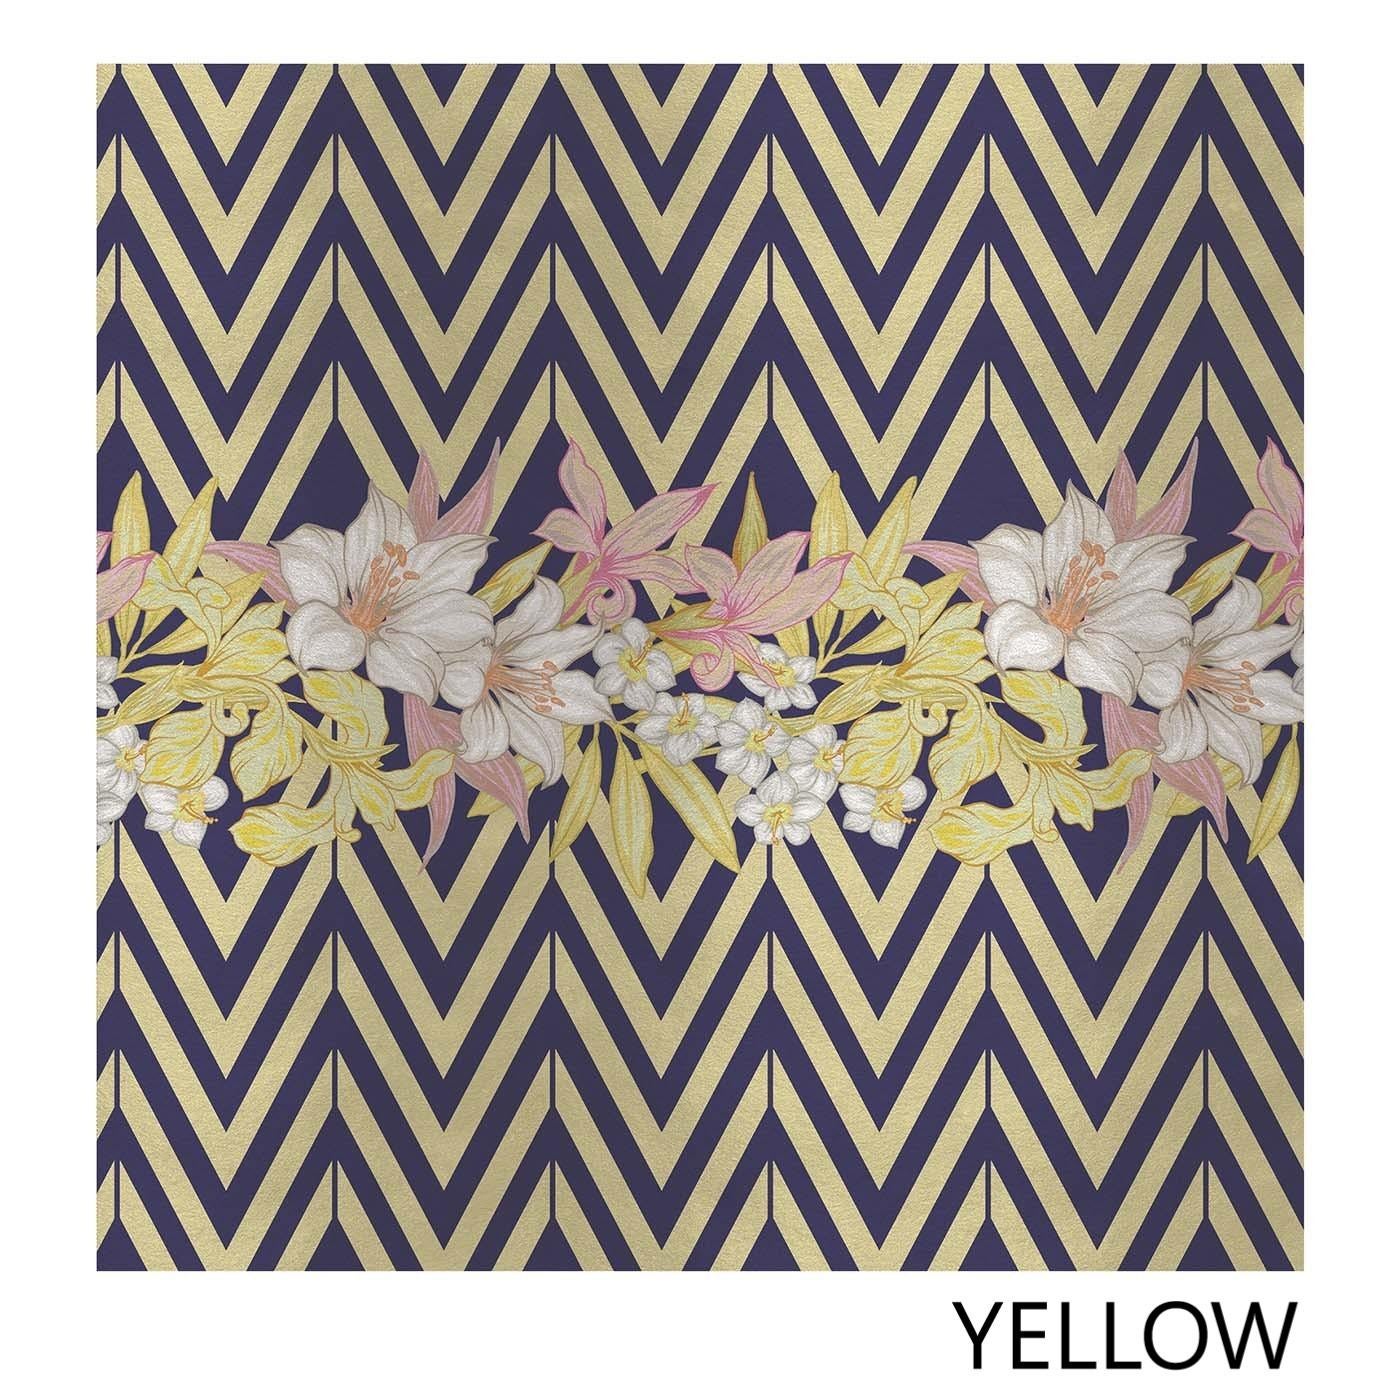 Textile Flowers and Chevron Pattern Panel